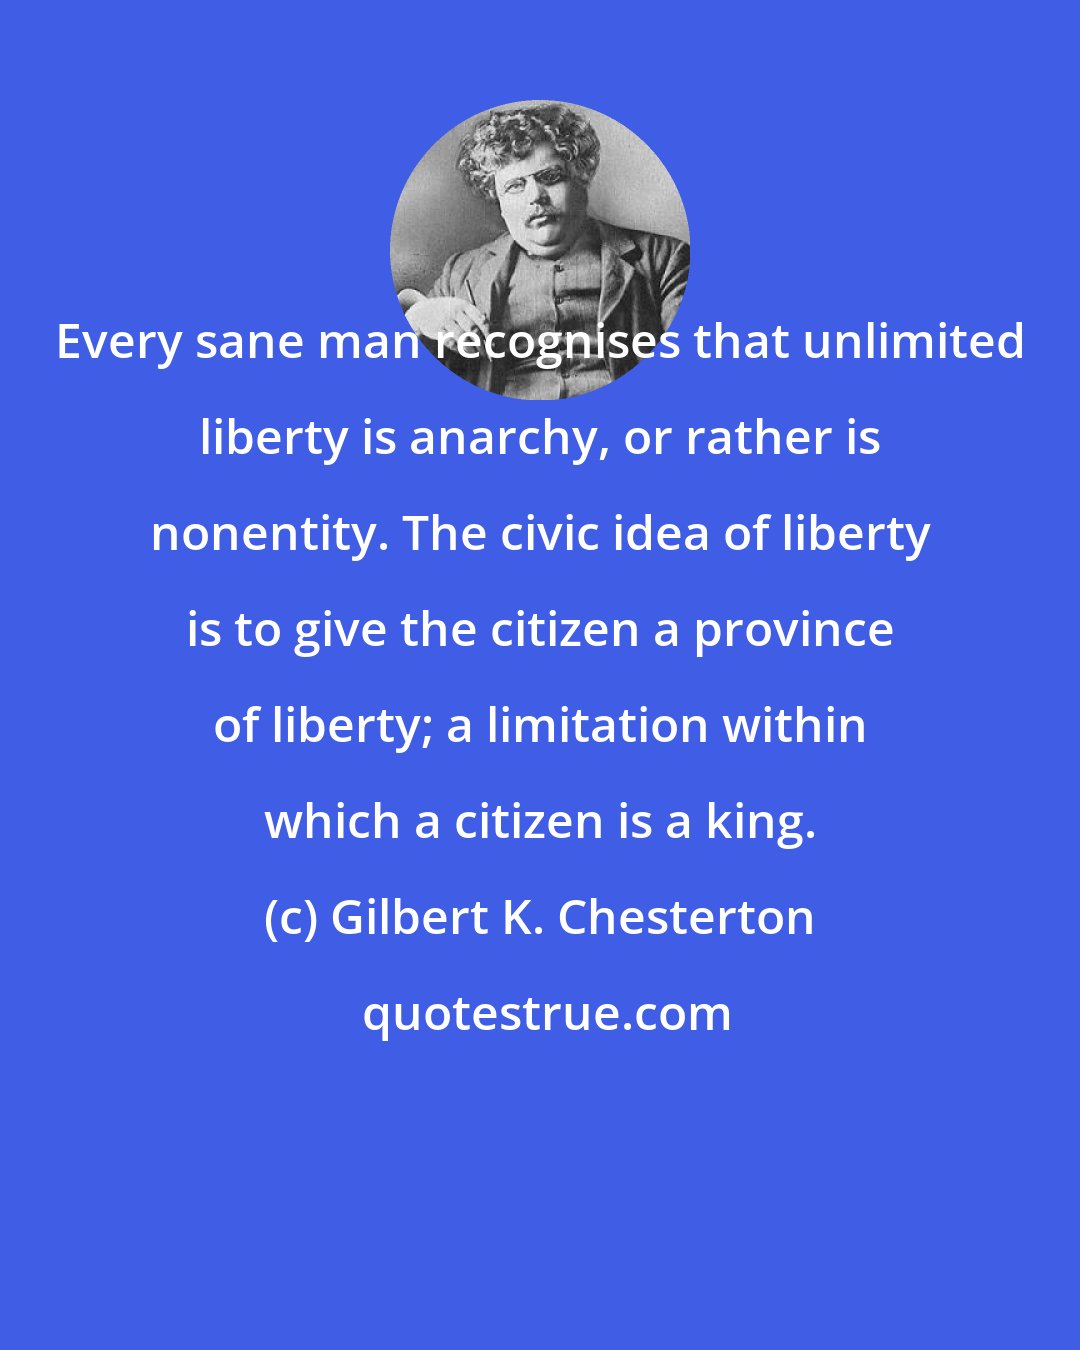 Gilbert K. Chesterton: Every sane man recognises that unlimited liberty is anarchy, or rather is nonentity. The civic idea of liberty is to give the citizen a province of liberty; a limitation within which a citizen is a king.